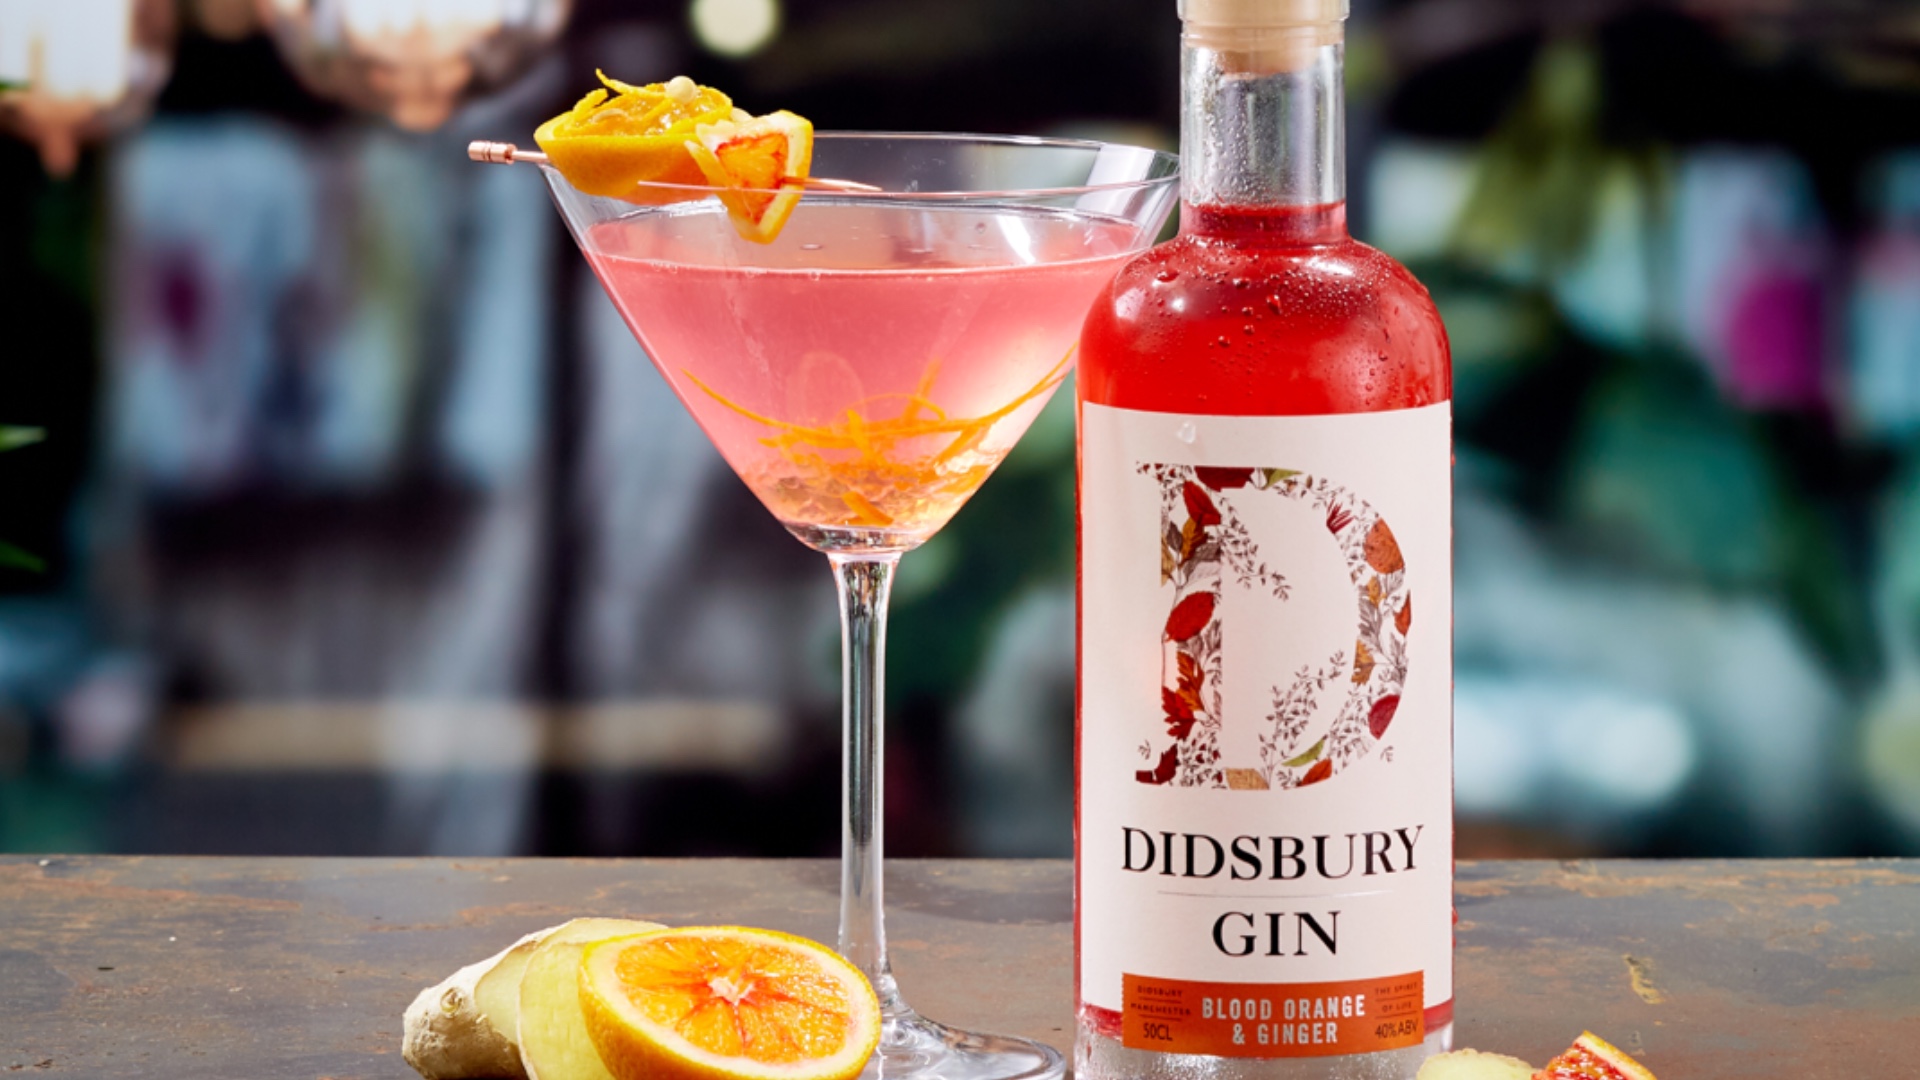 Autumnal cocktail inspo to leave you shaken and stirred! - Didsbury Gin.